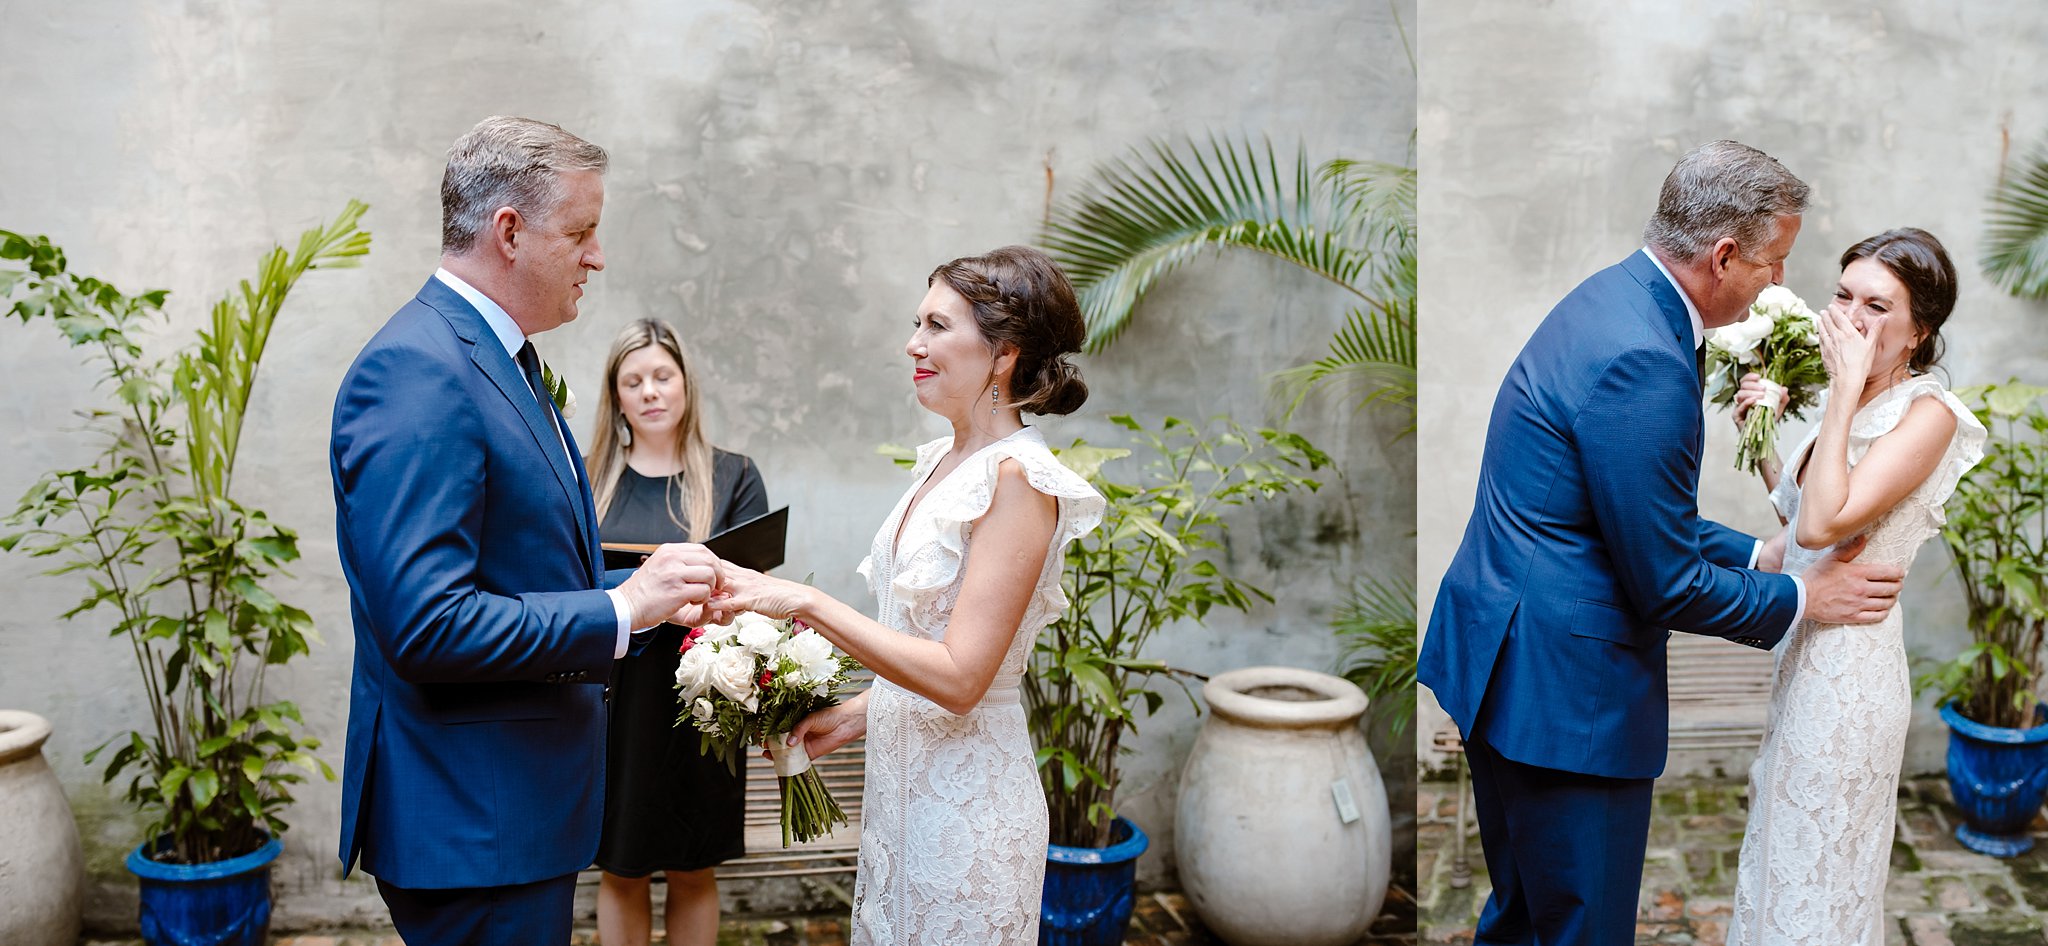 Christmas Elopement at Bevolo Gas Lantern Museum in New Orleans